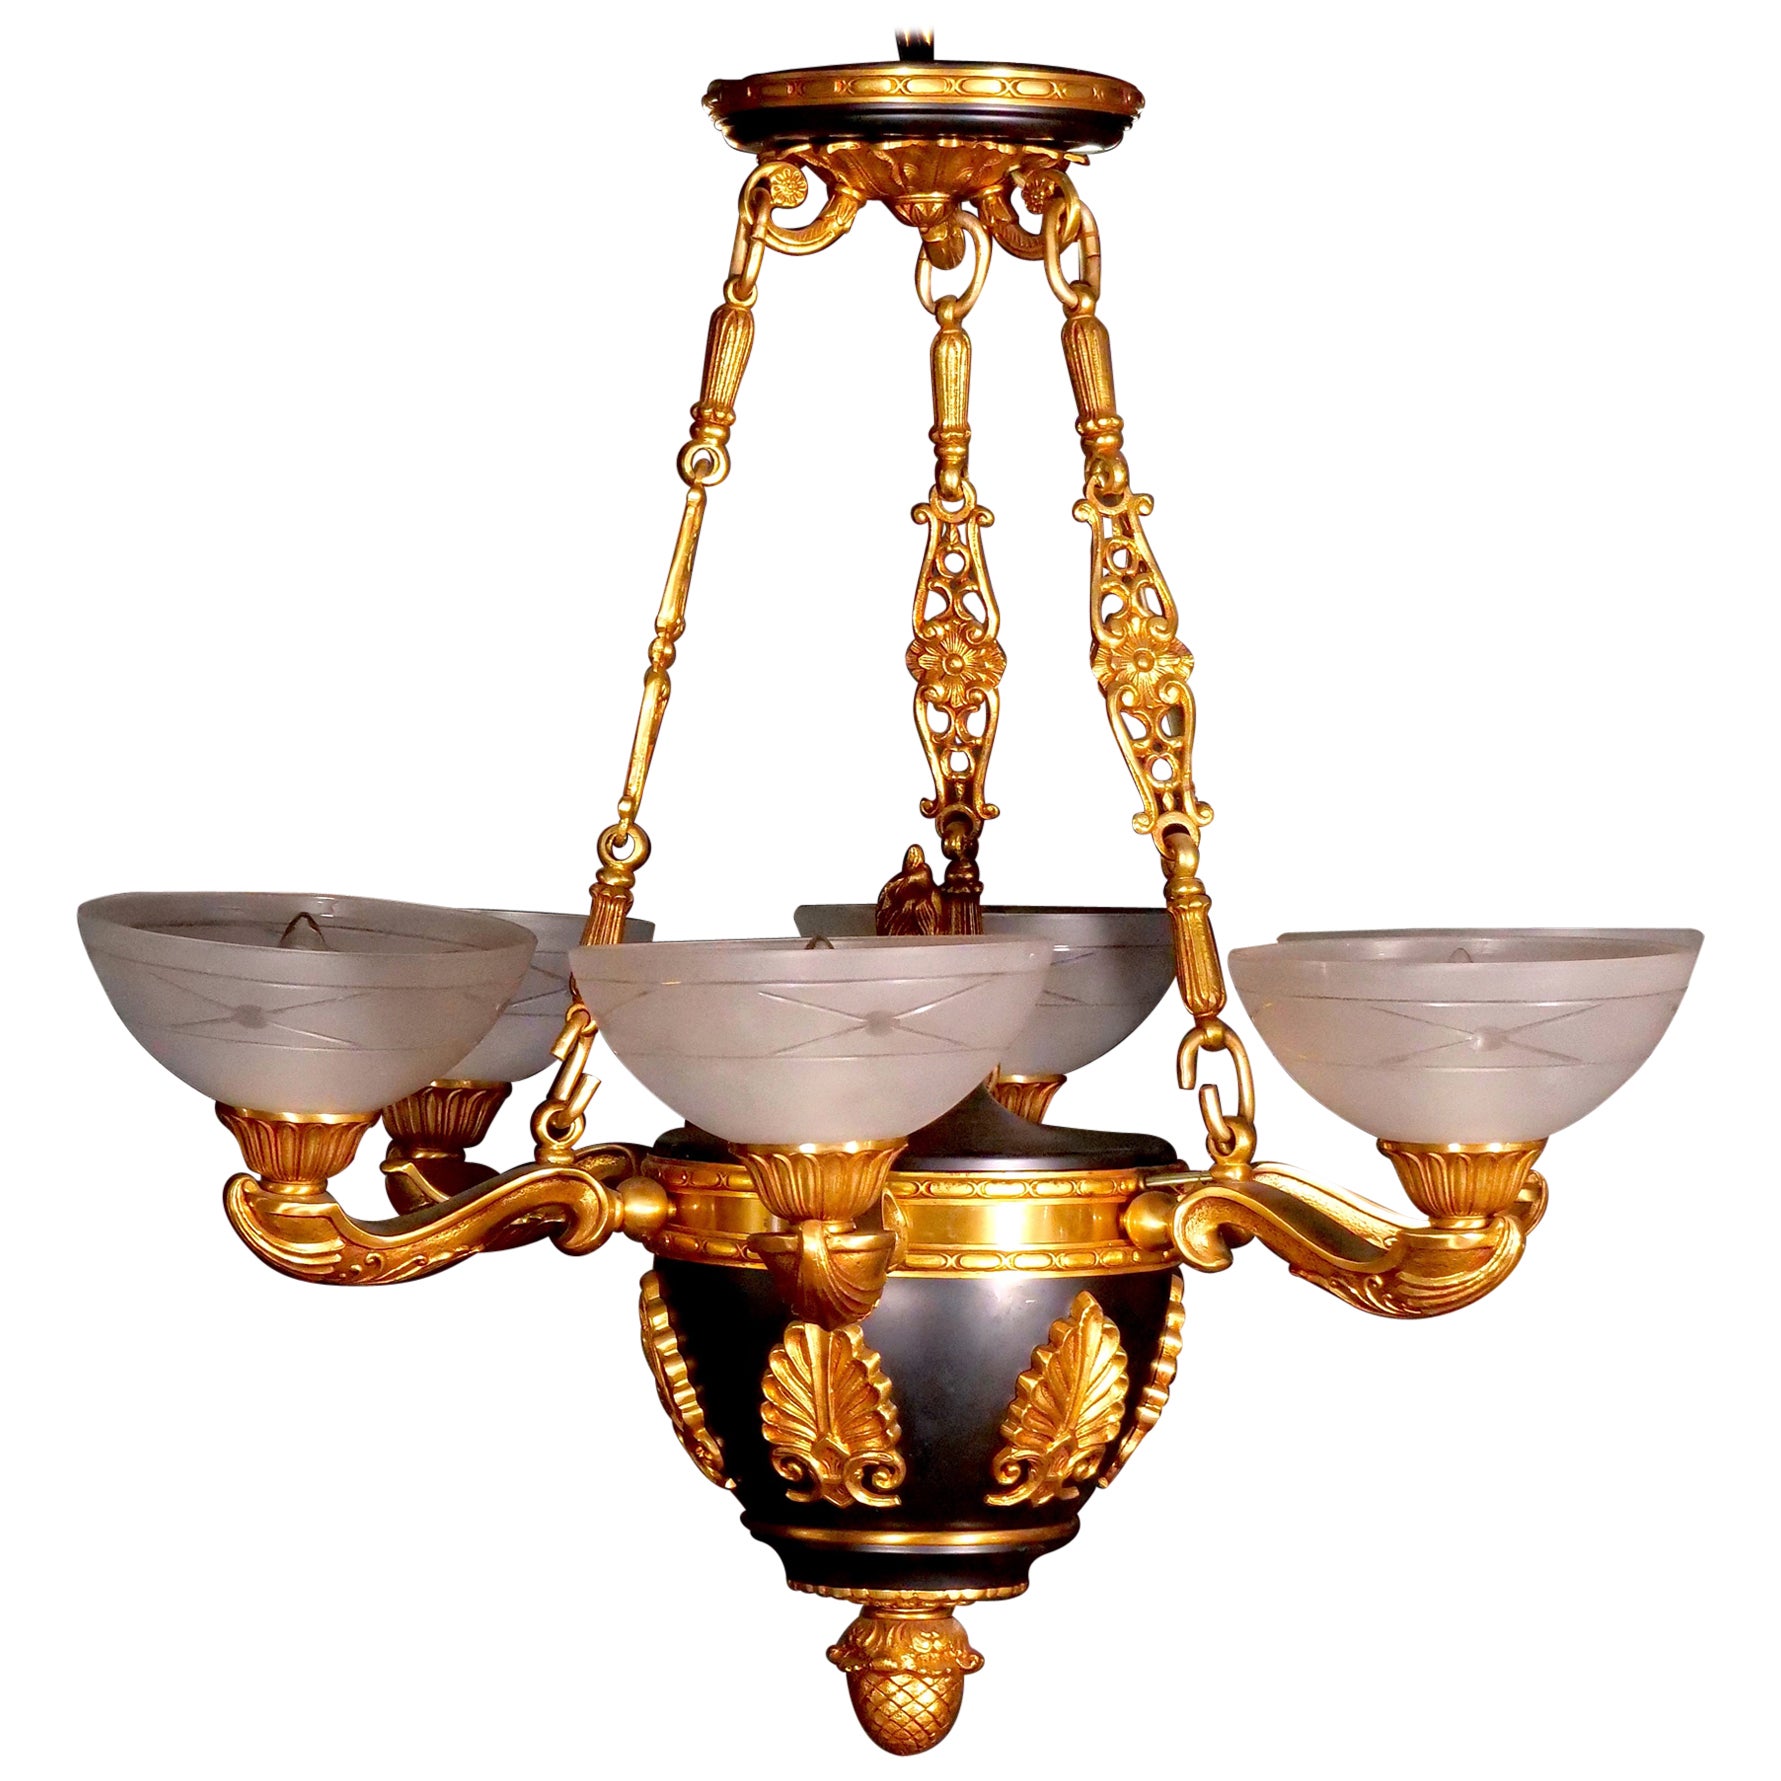 19th Century French Bronze Ormolu Mounted / Patinated Empire Style Chandelier